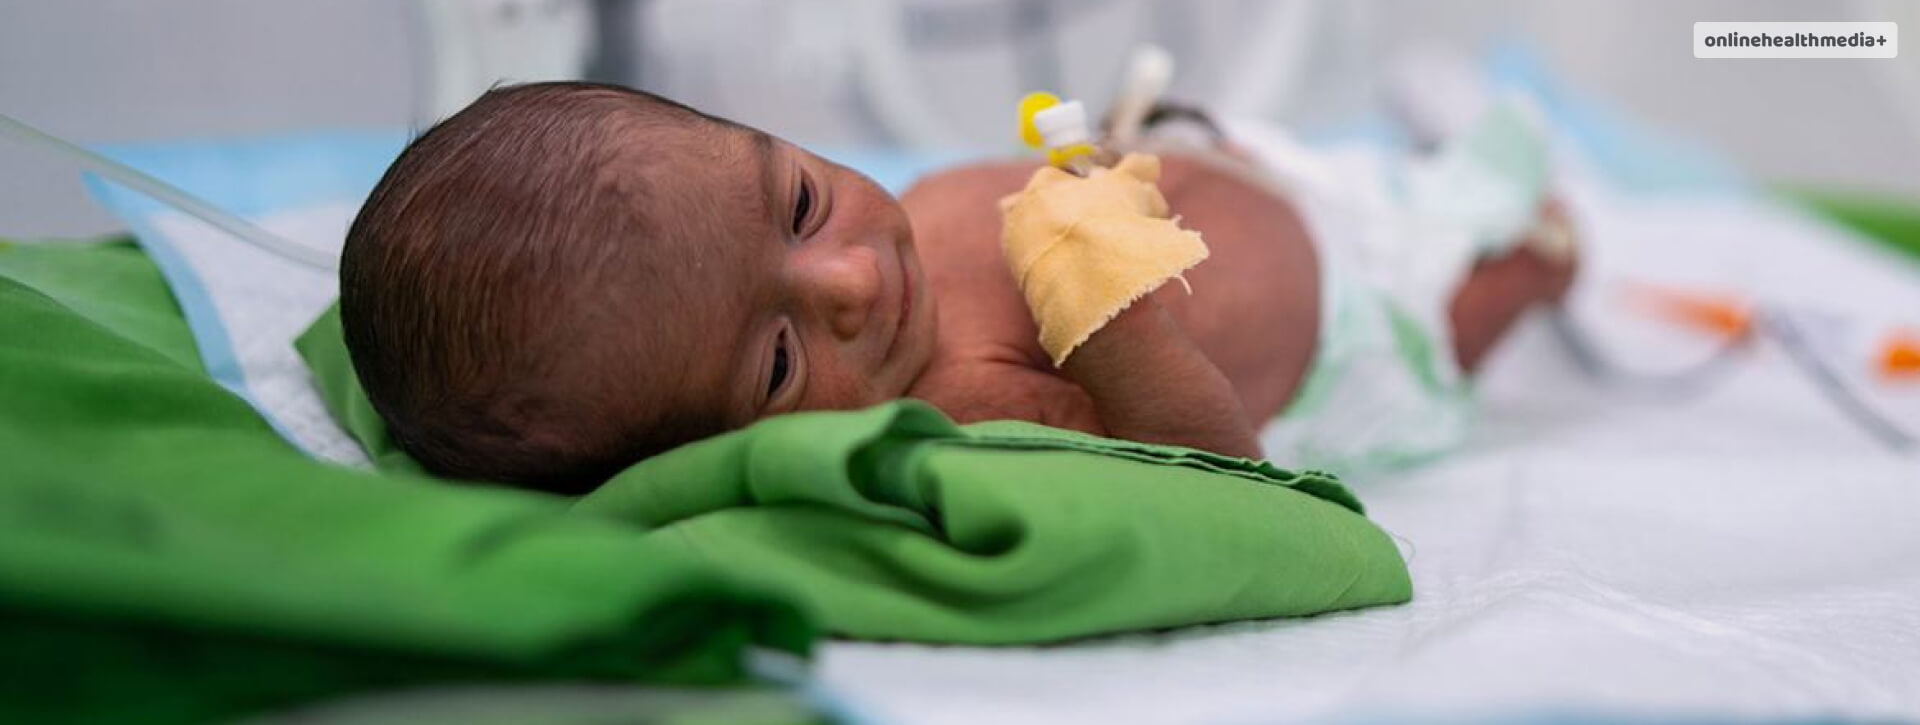 High Number Of Preterm Births Linked To Poor Maternal Health And Malnutrition